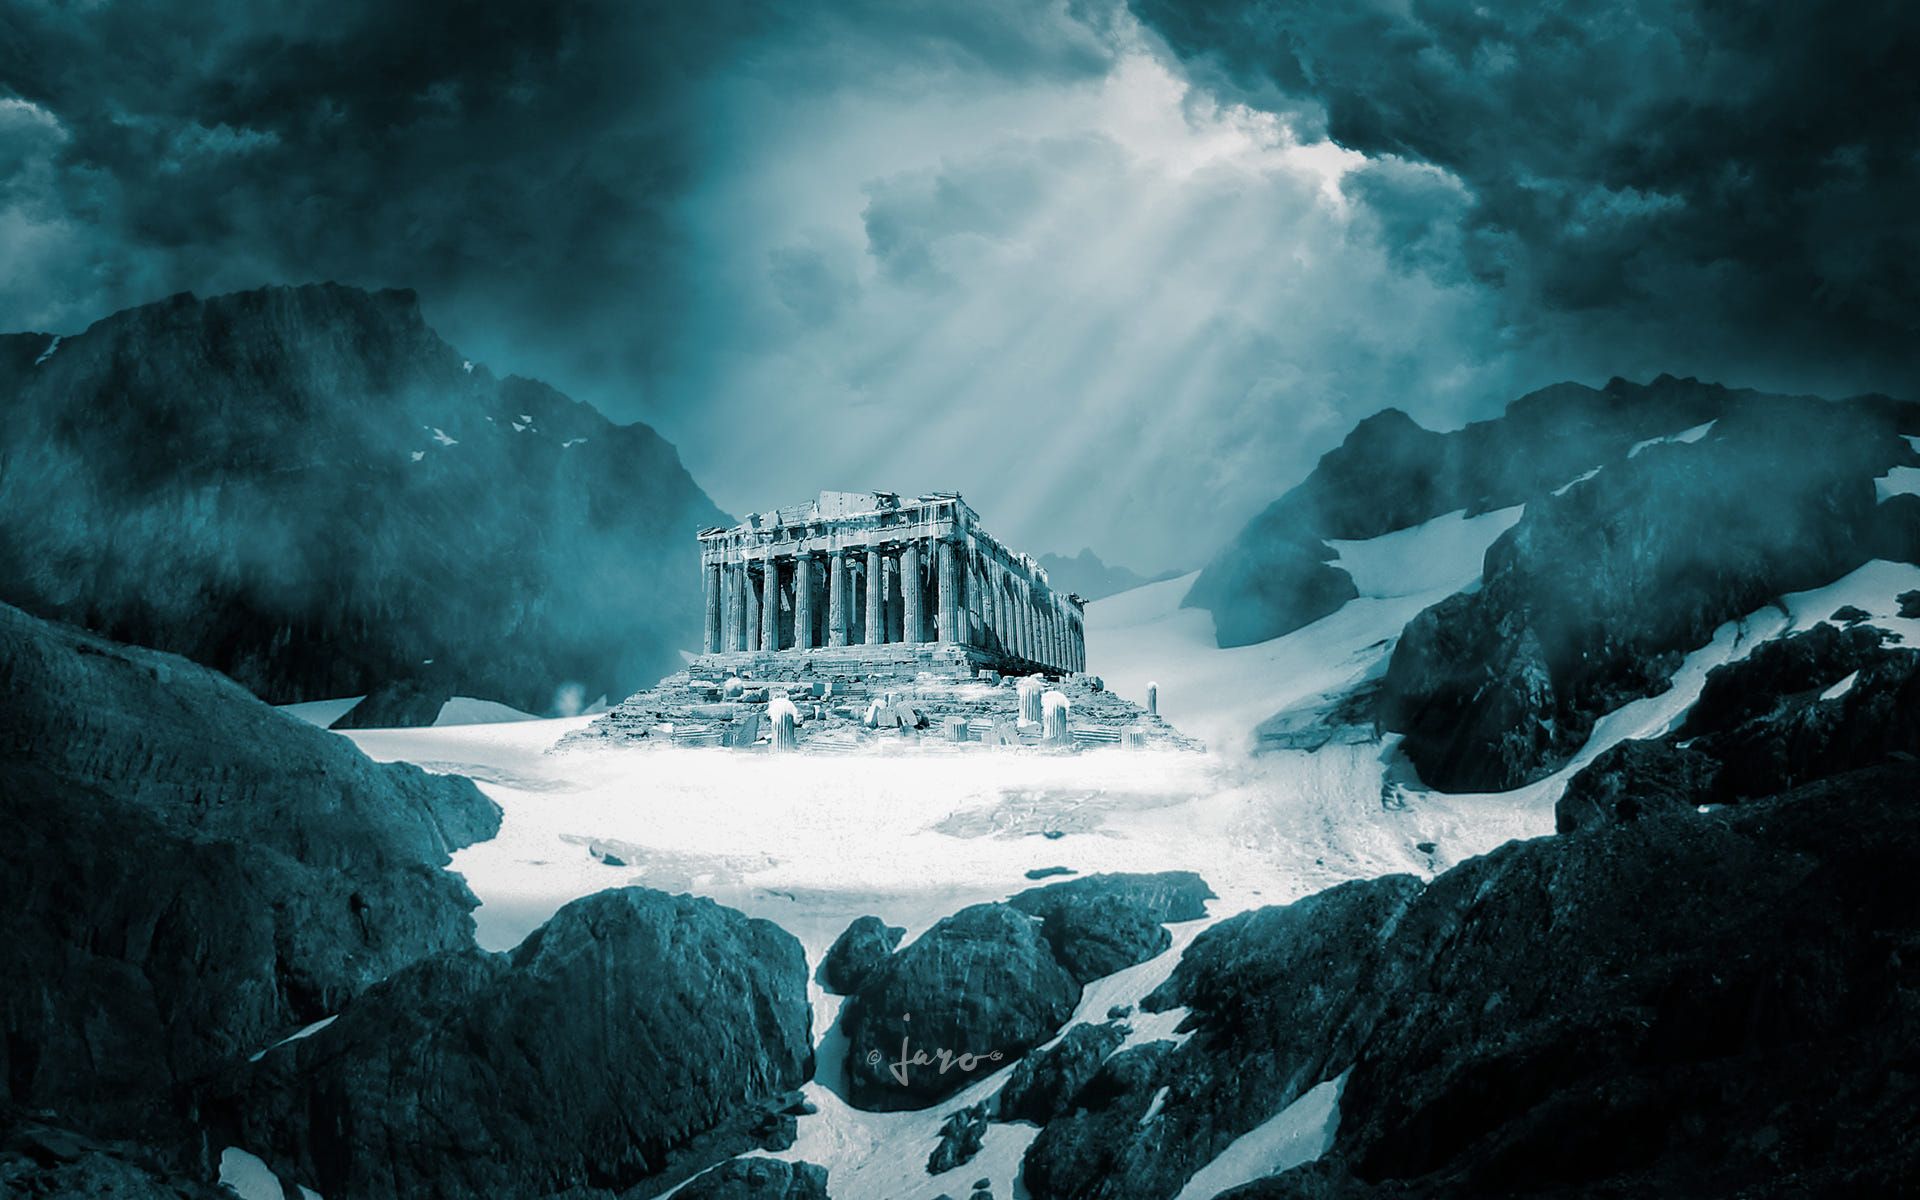 Lost Temple - photo manipulation by Jaro